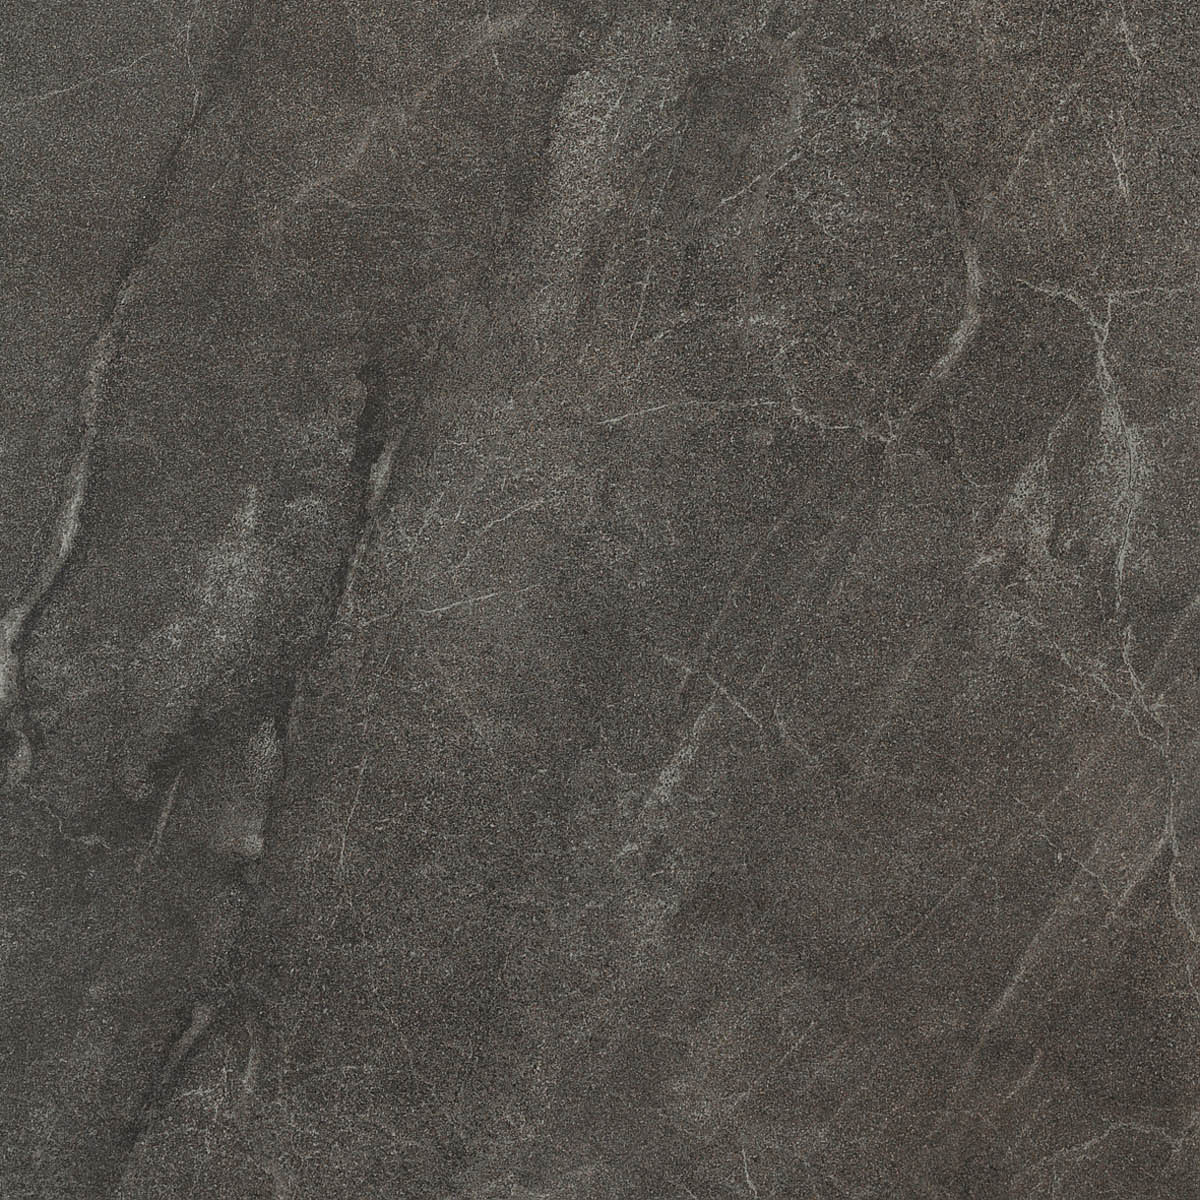 Imola Muse Grigio Scuro Lappato Flat Glossy 149459 120x120cm rectified 10,5mm - MUSE 120DG LP